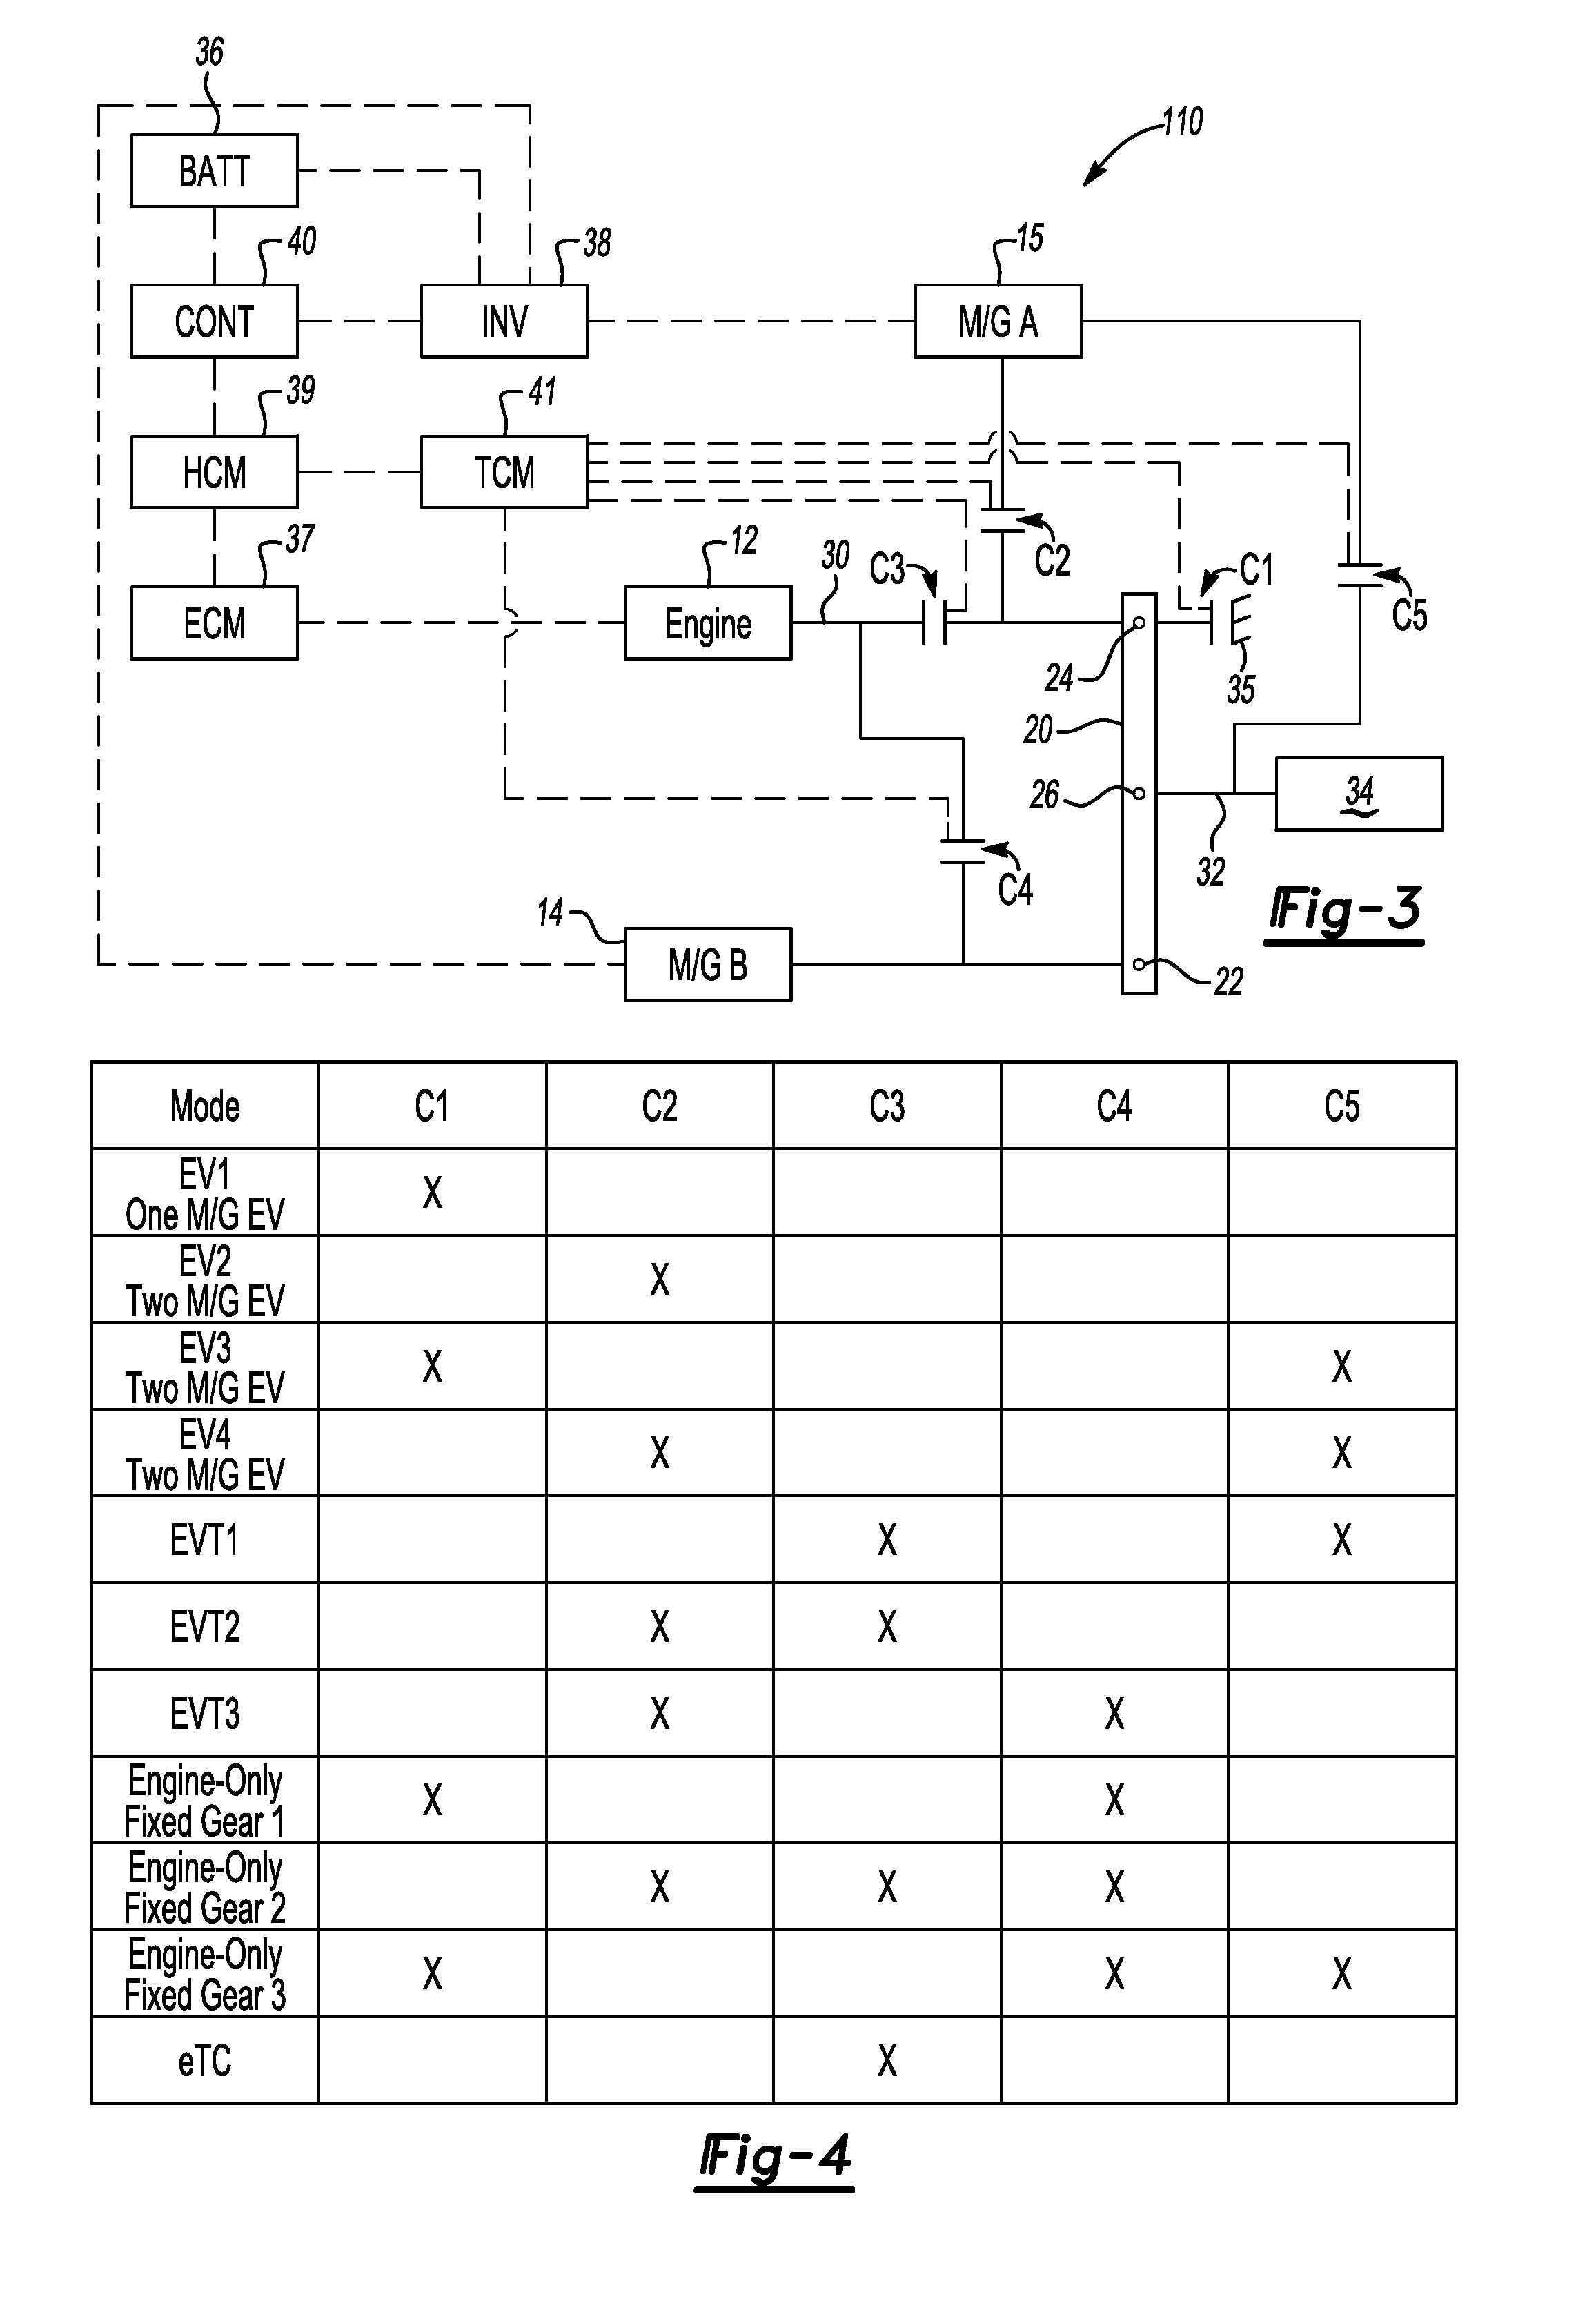 Single planetary hybrid powertrain with at least three electrically-variable operating modes